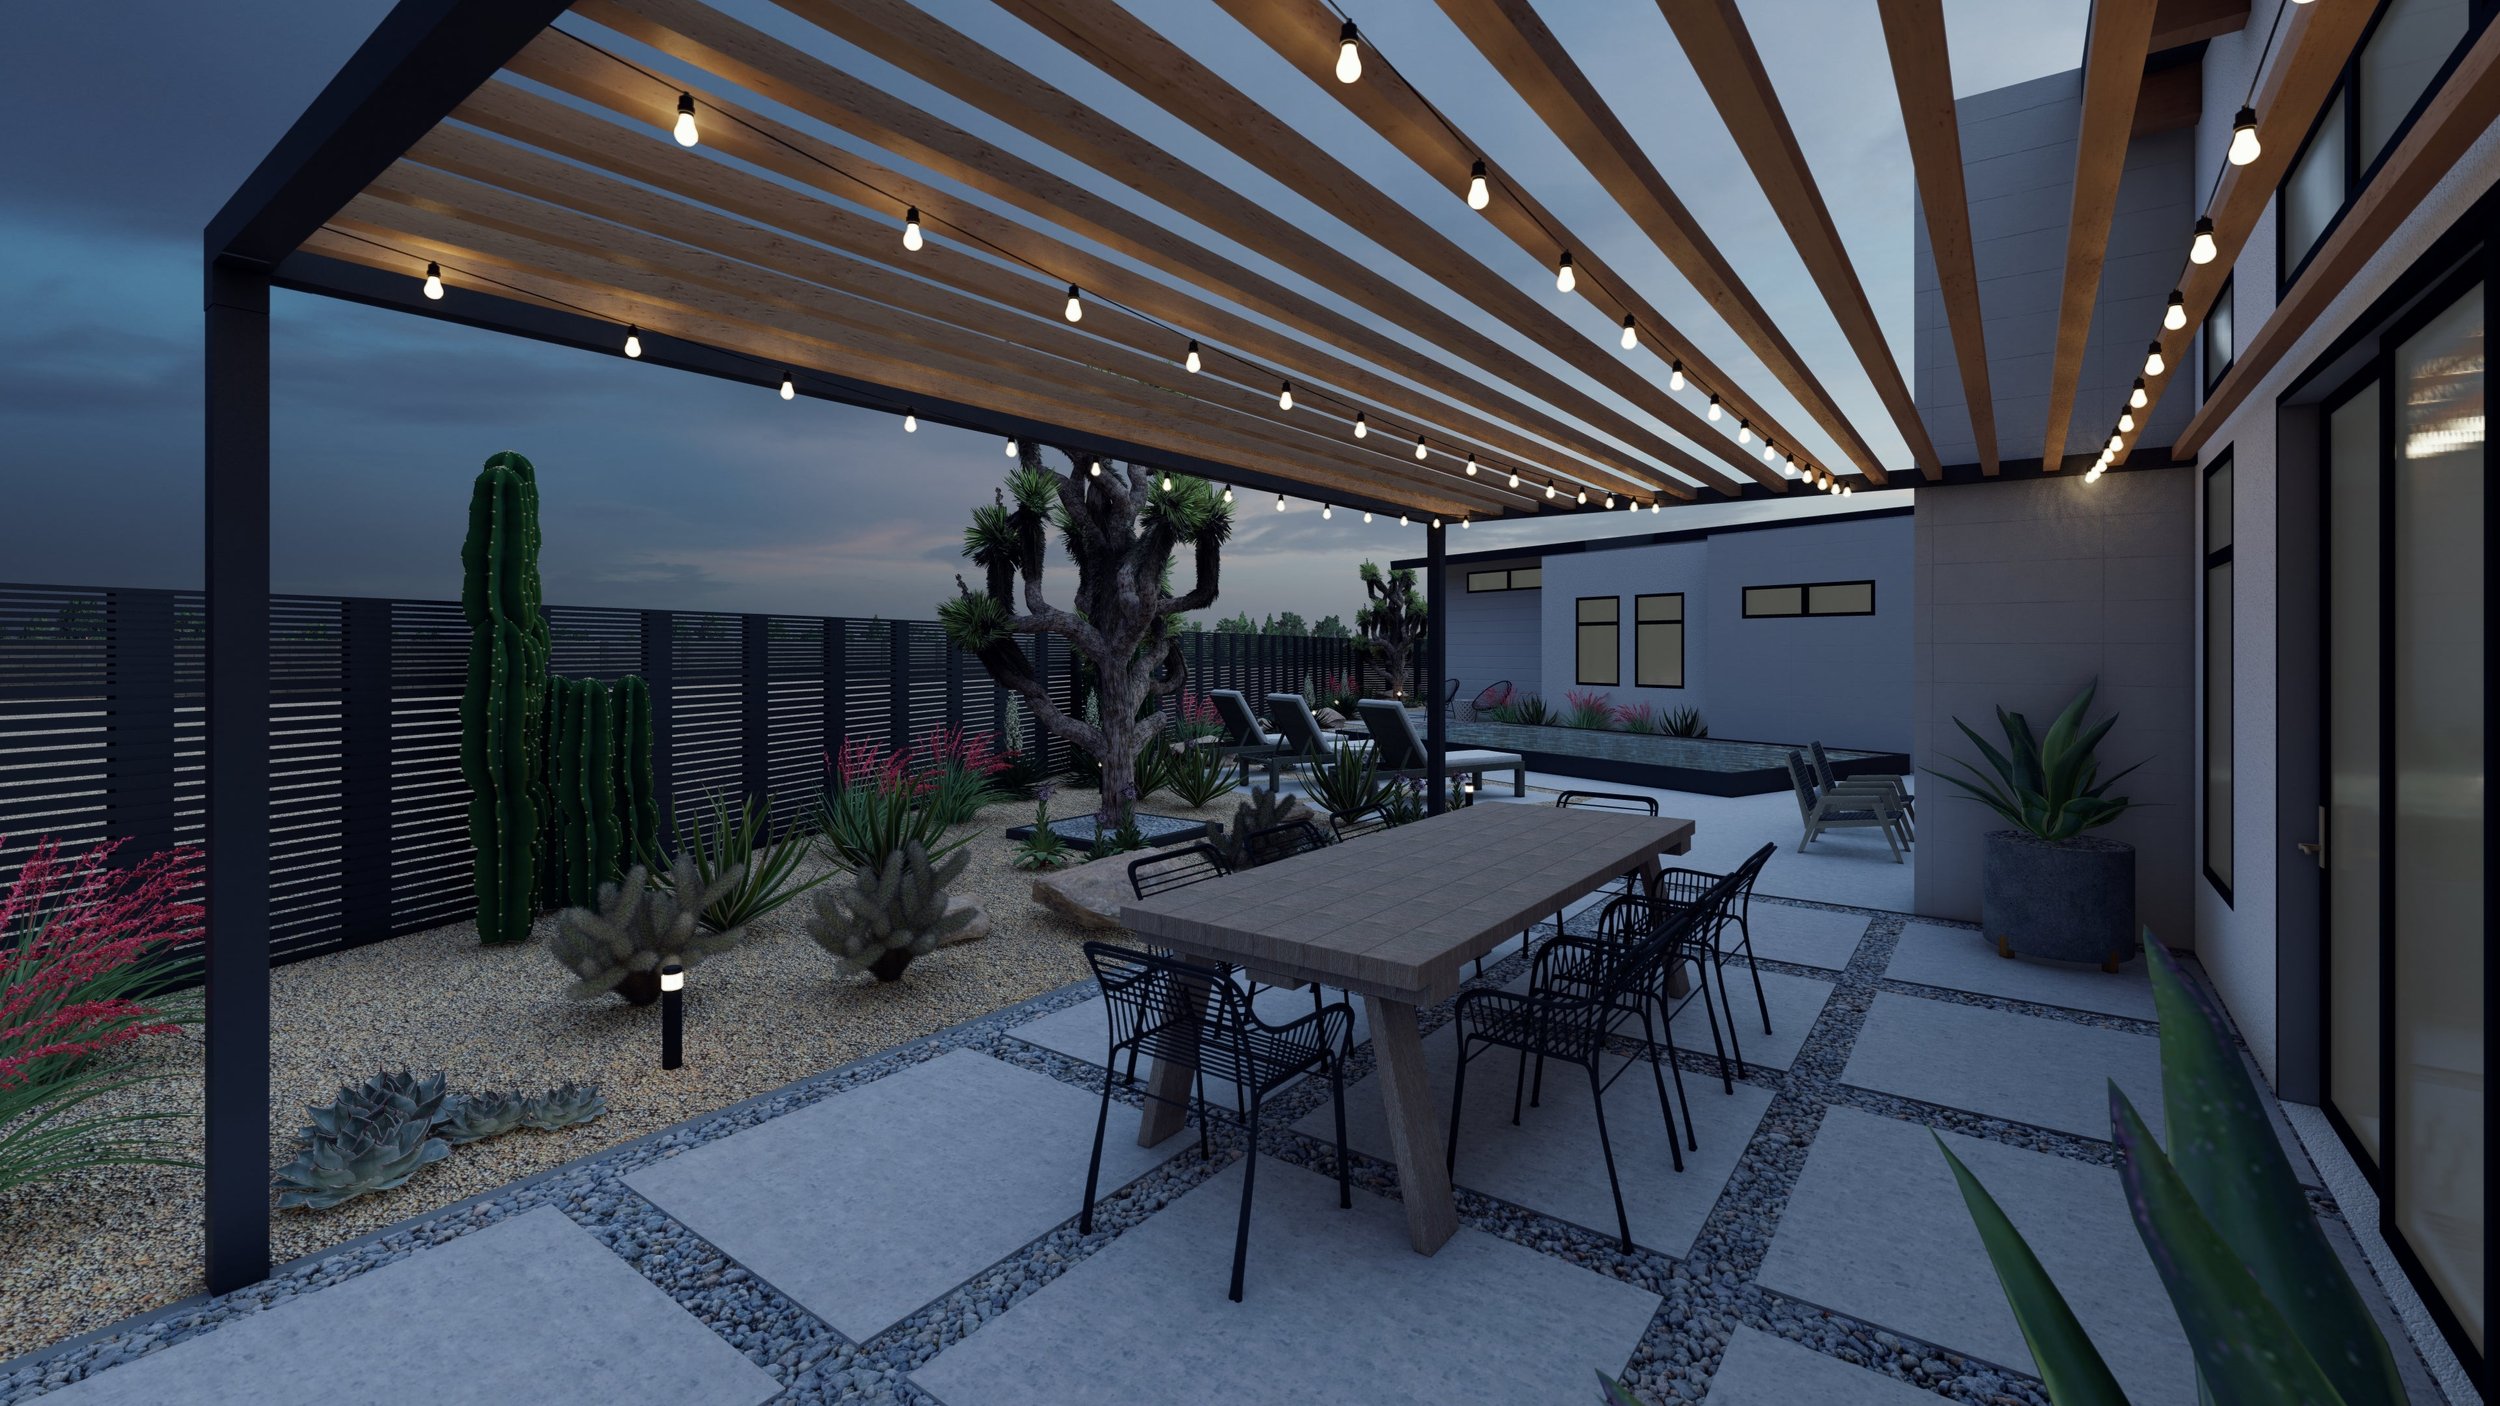 String lighting traces the boards of the pergola ceiling, adding an appealing glow while keeping views of the night sky clear.